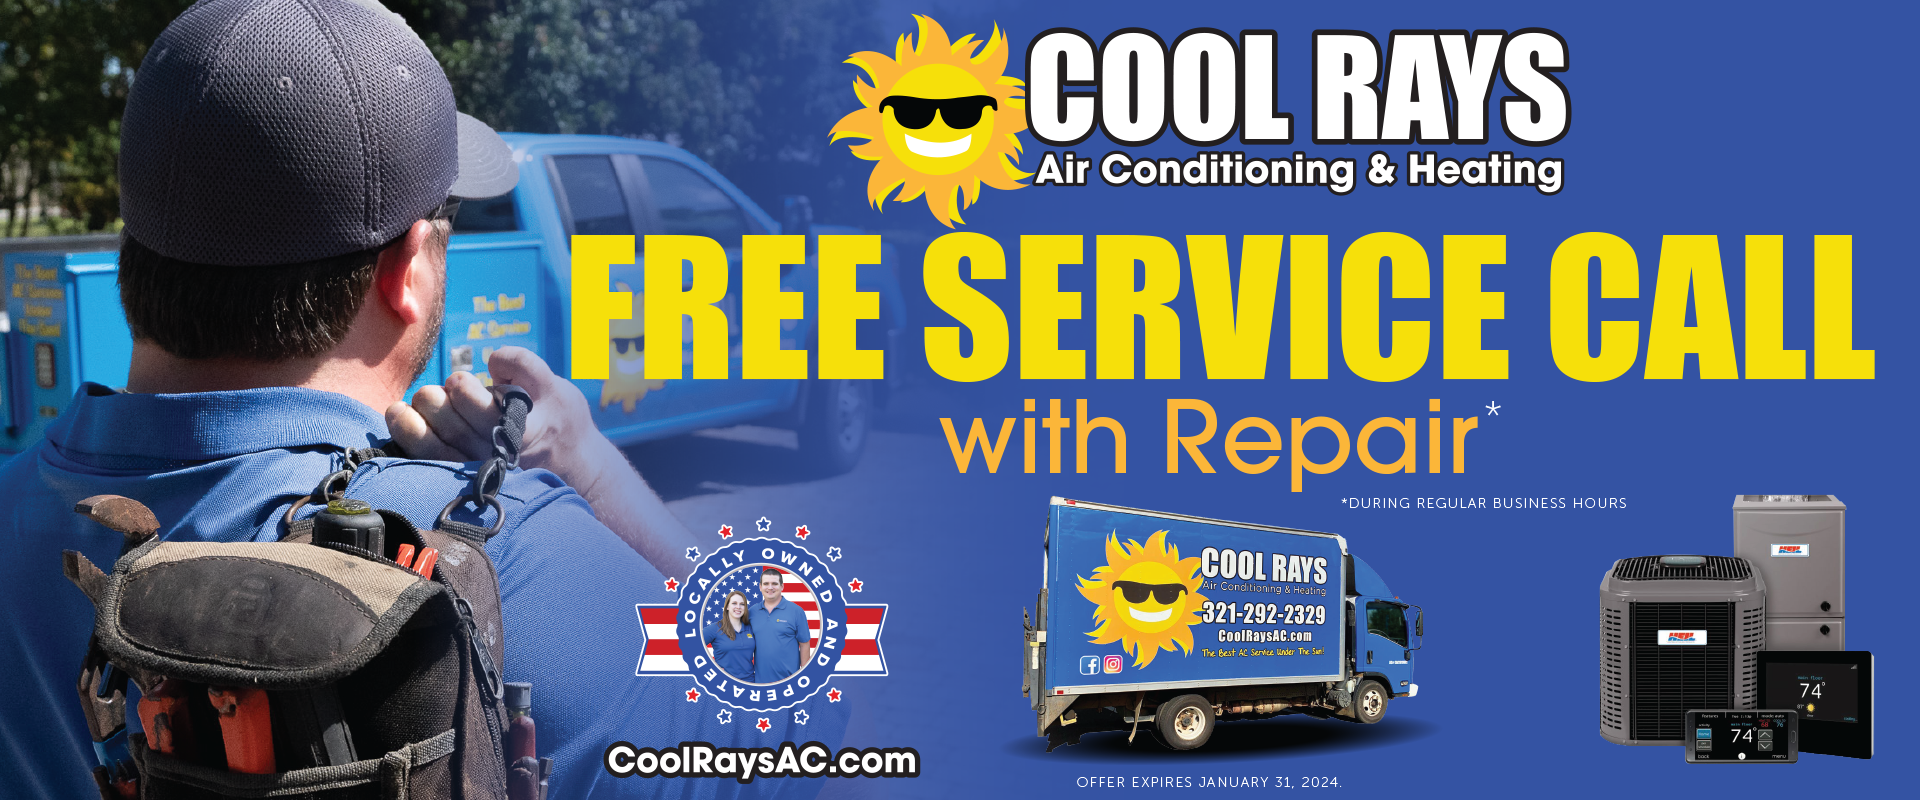 Free Home Service Call with Home AC Repair - call for details!